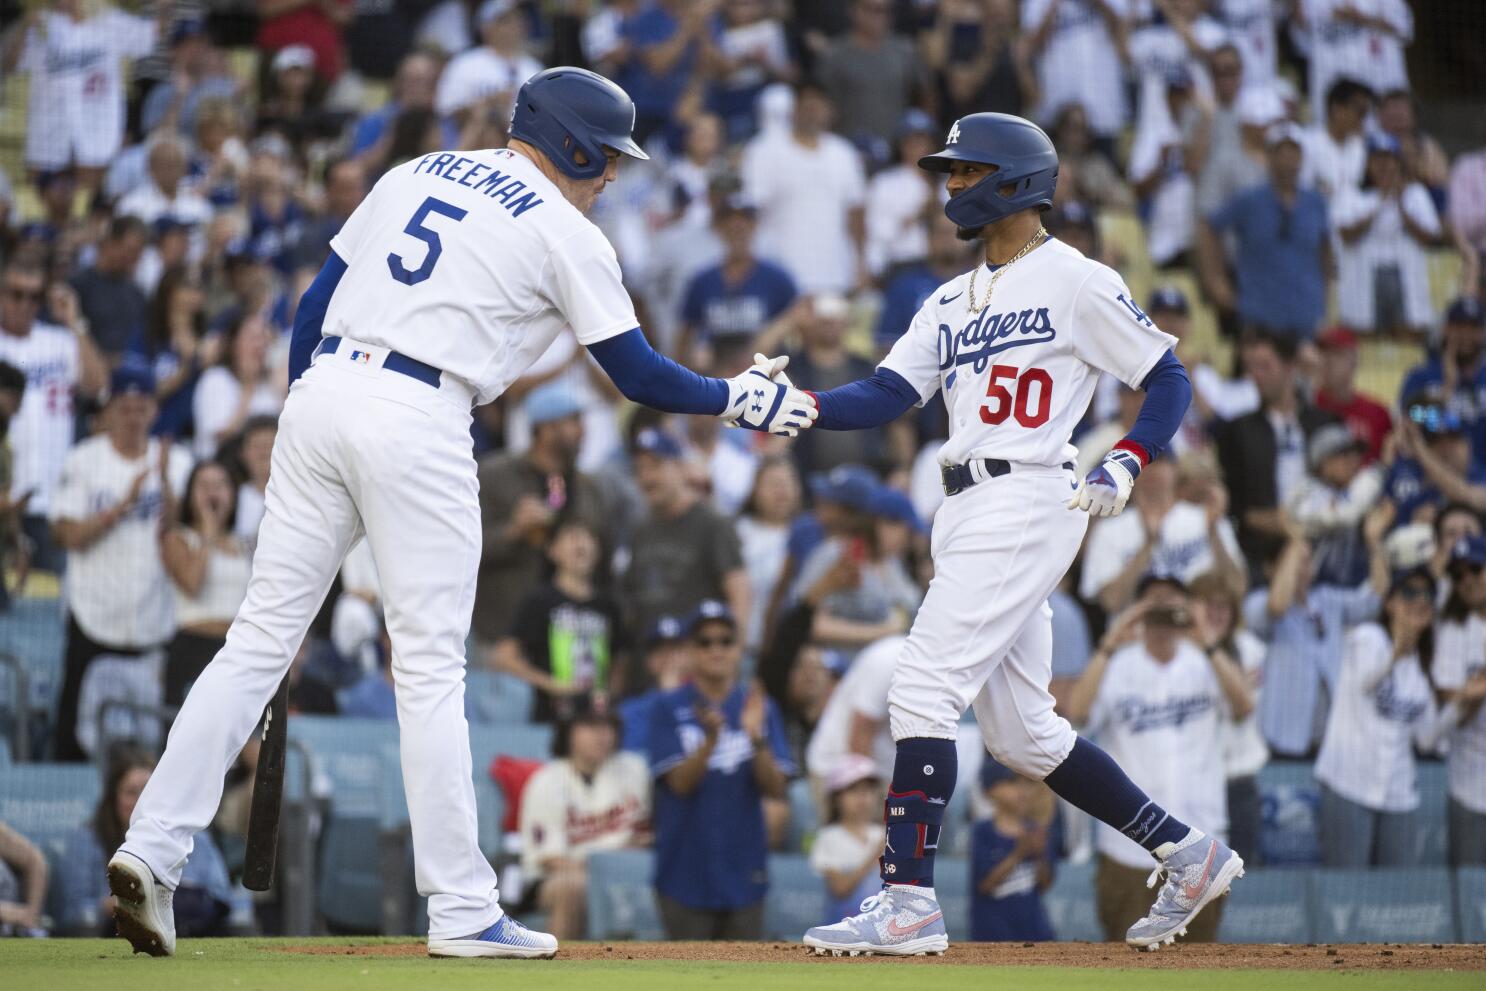 Dodgers enter All-Star break with win over Angels, momentum - Los